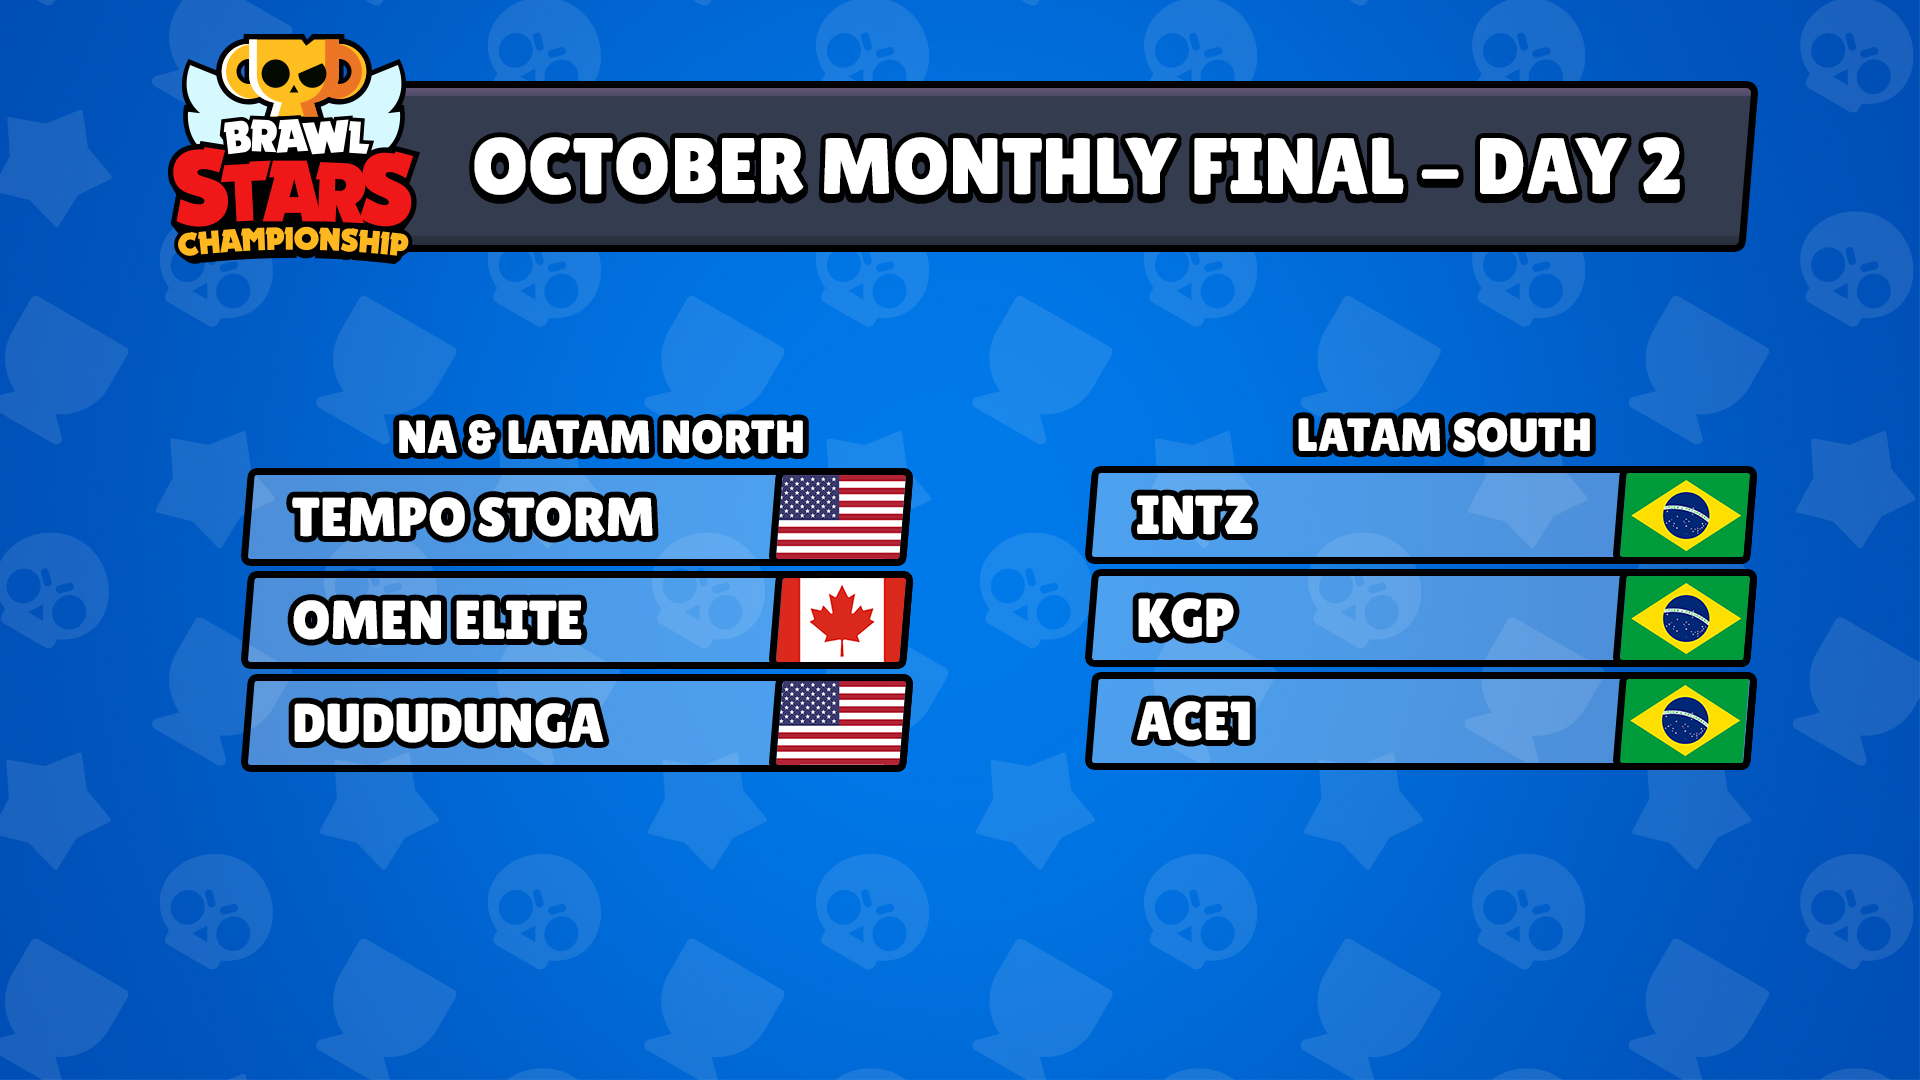 Brawl Stars Esports On Twitter Day 2 Of The October Monthly Final Begins In One Hour Today The Battle Rages On Between The Top Latam South Teams And We See The Conclusion - rages do brawl stars